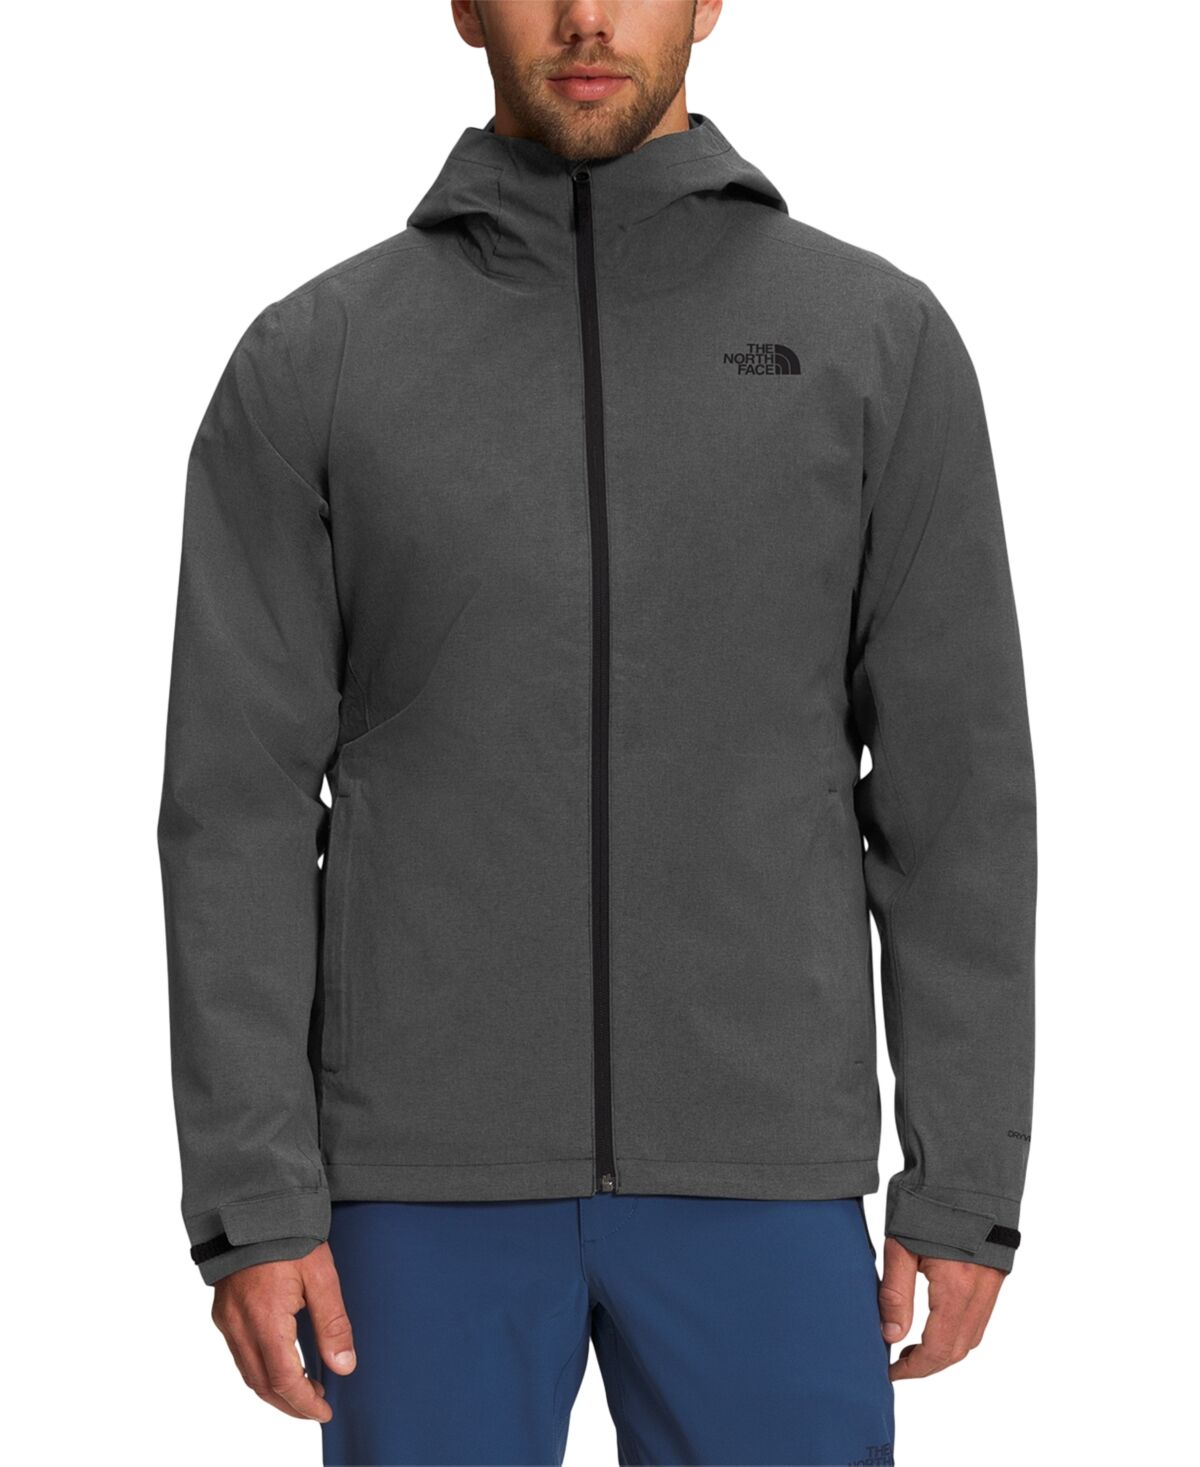 The North Face Men's Thermoball Triclimate Jacket - Tnf Dark Grey Heather/tnf Black